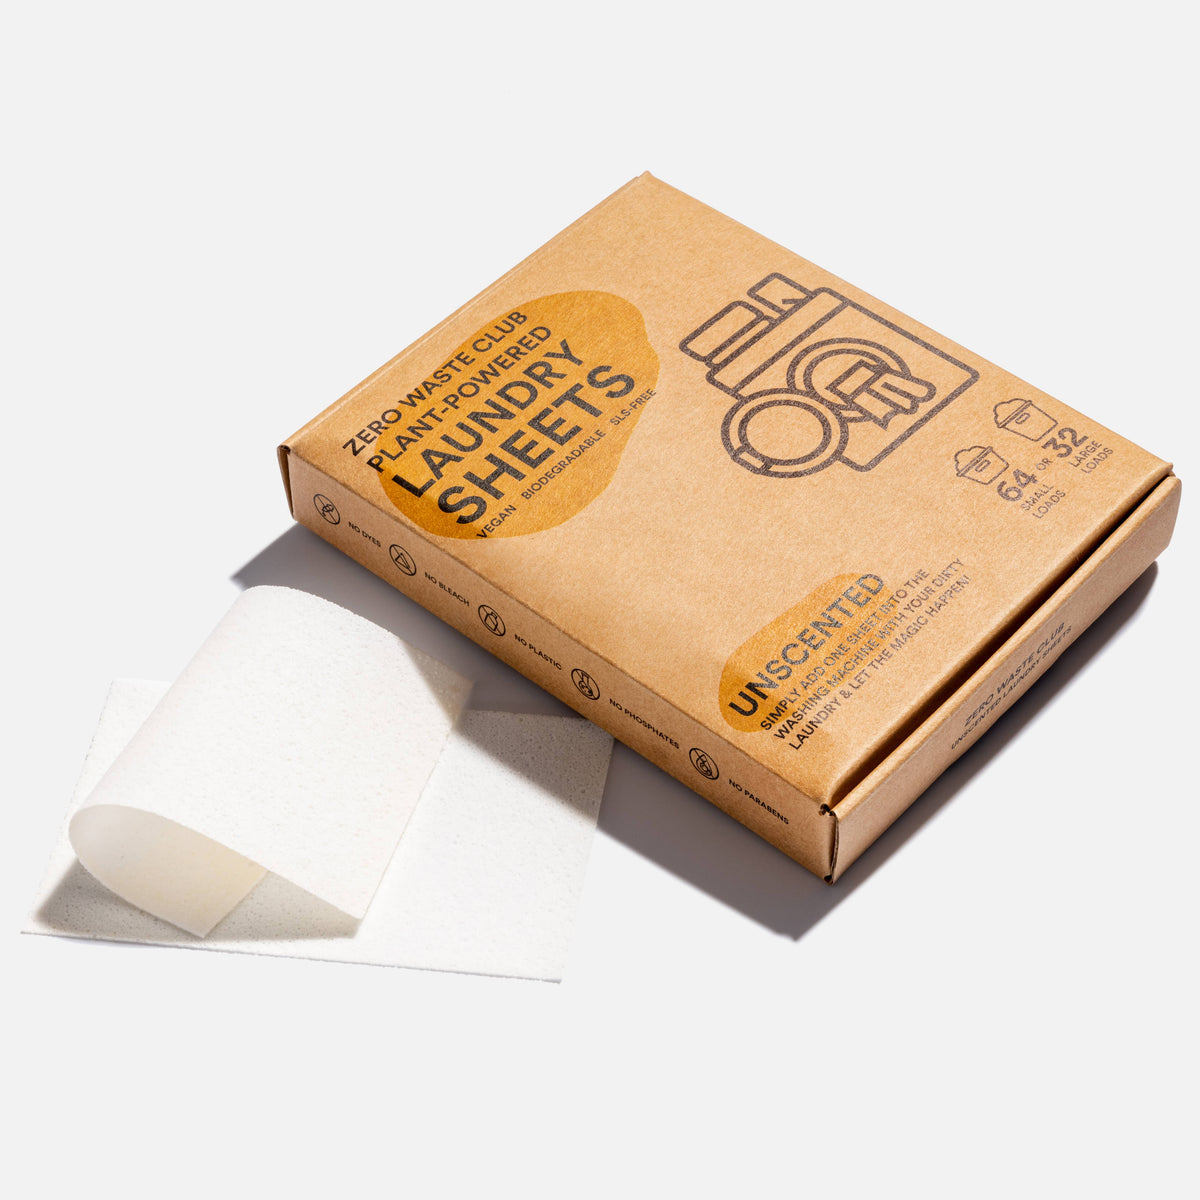 Zero Waste Club - Laundry Detergent Sheets - Pack of 64 (Plastic Free): Unscented - Fragrance Free - 64 Sheets